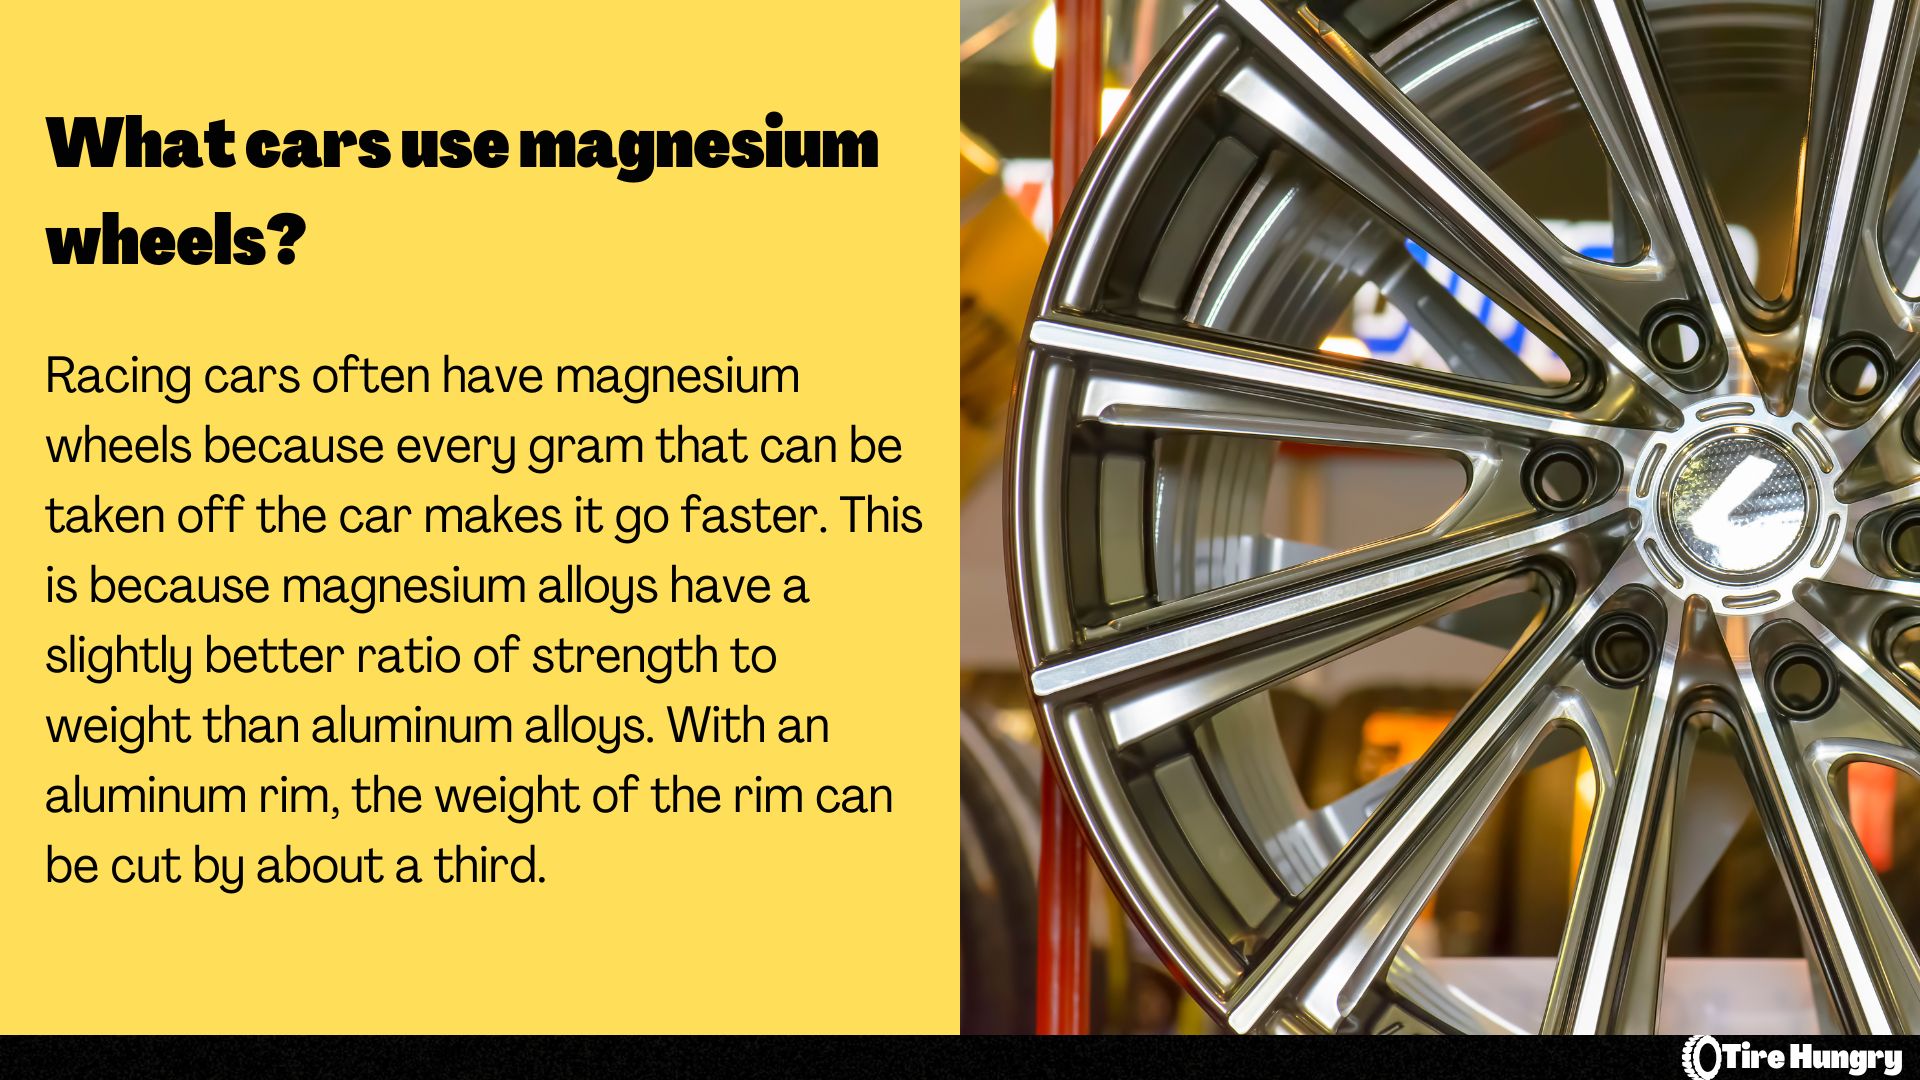 What cars use magnesium wheels